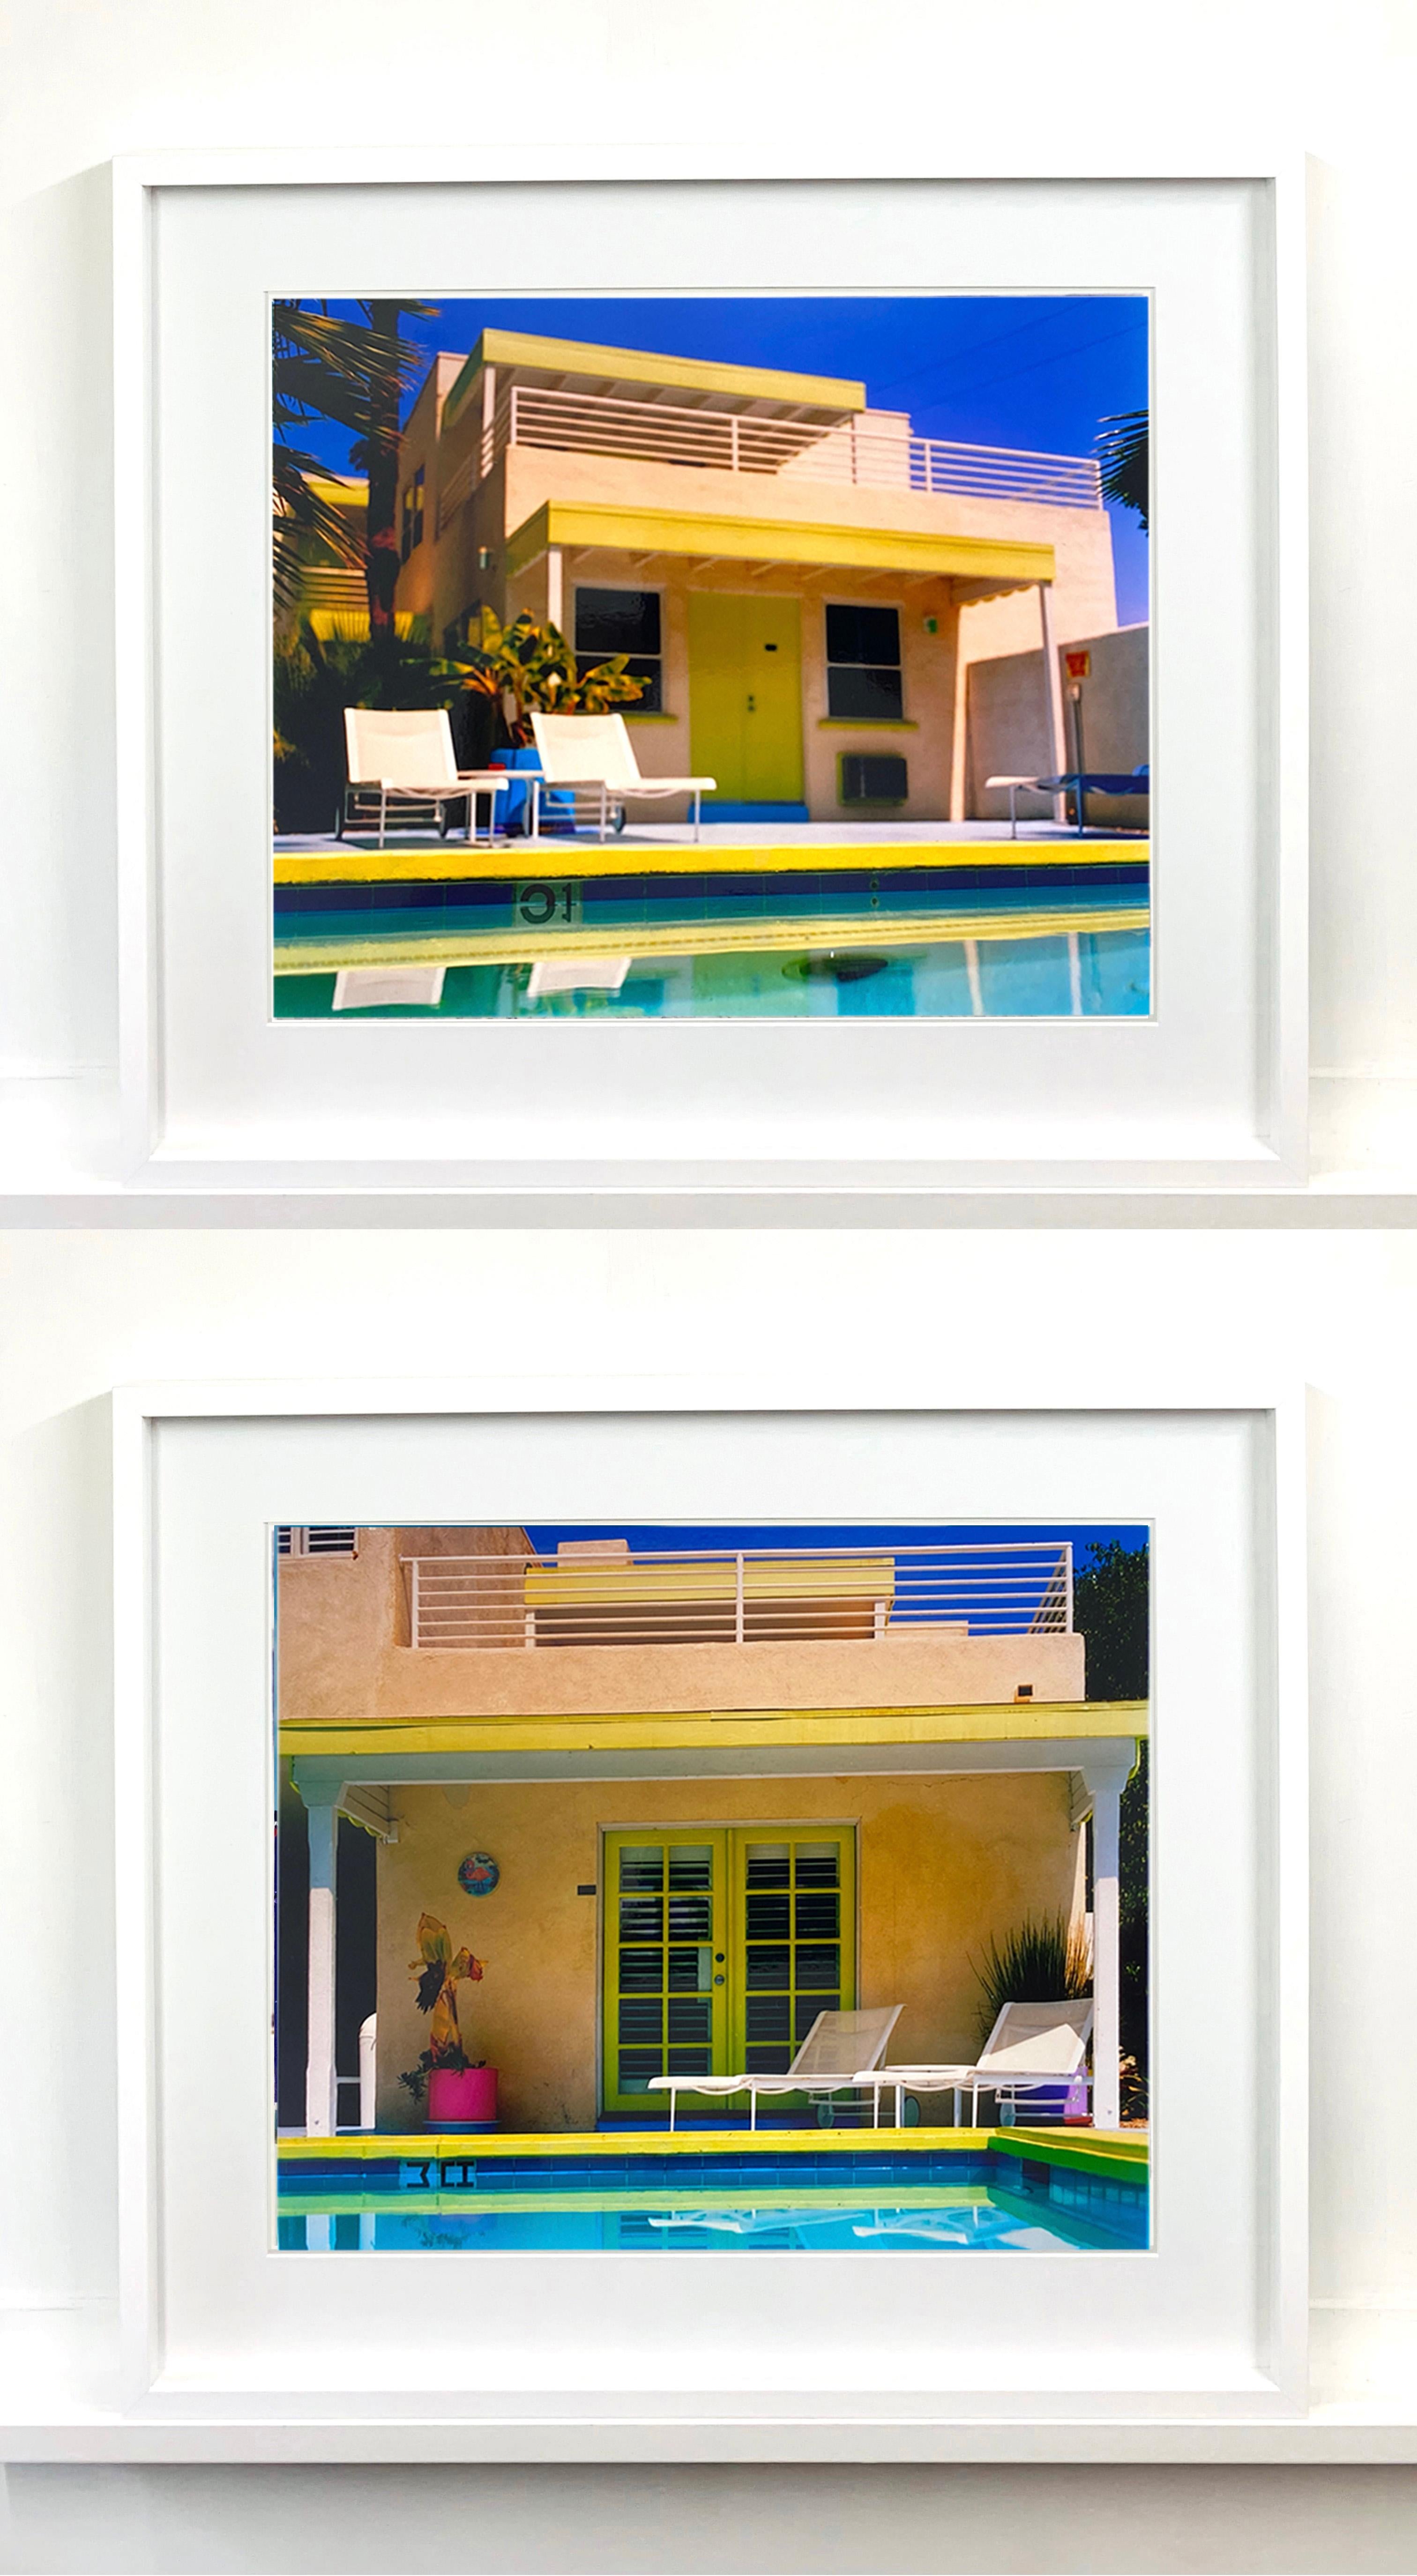 Palm Springs Pool Side, photography by Richard Heeps at Ballantines Movie Colony. This artwork captures the classic mid-century Palm Springs architecture set against saturated blue skies and the cool pool with accents of pink and almost neon